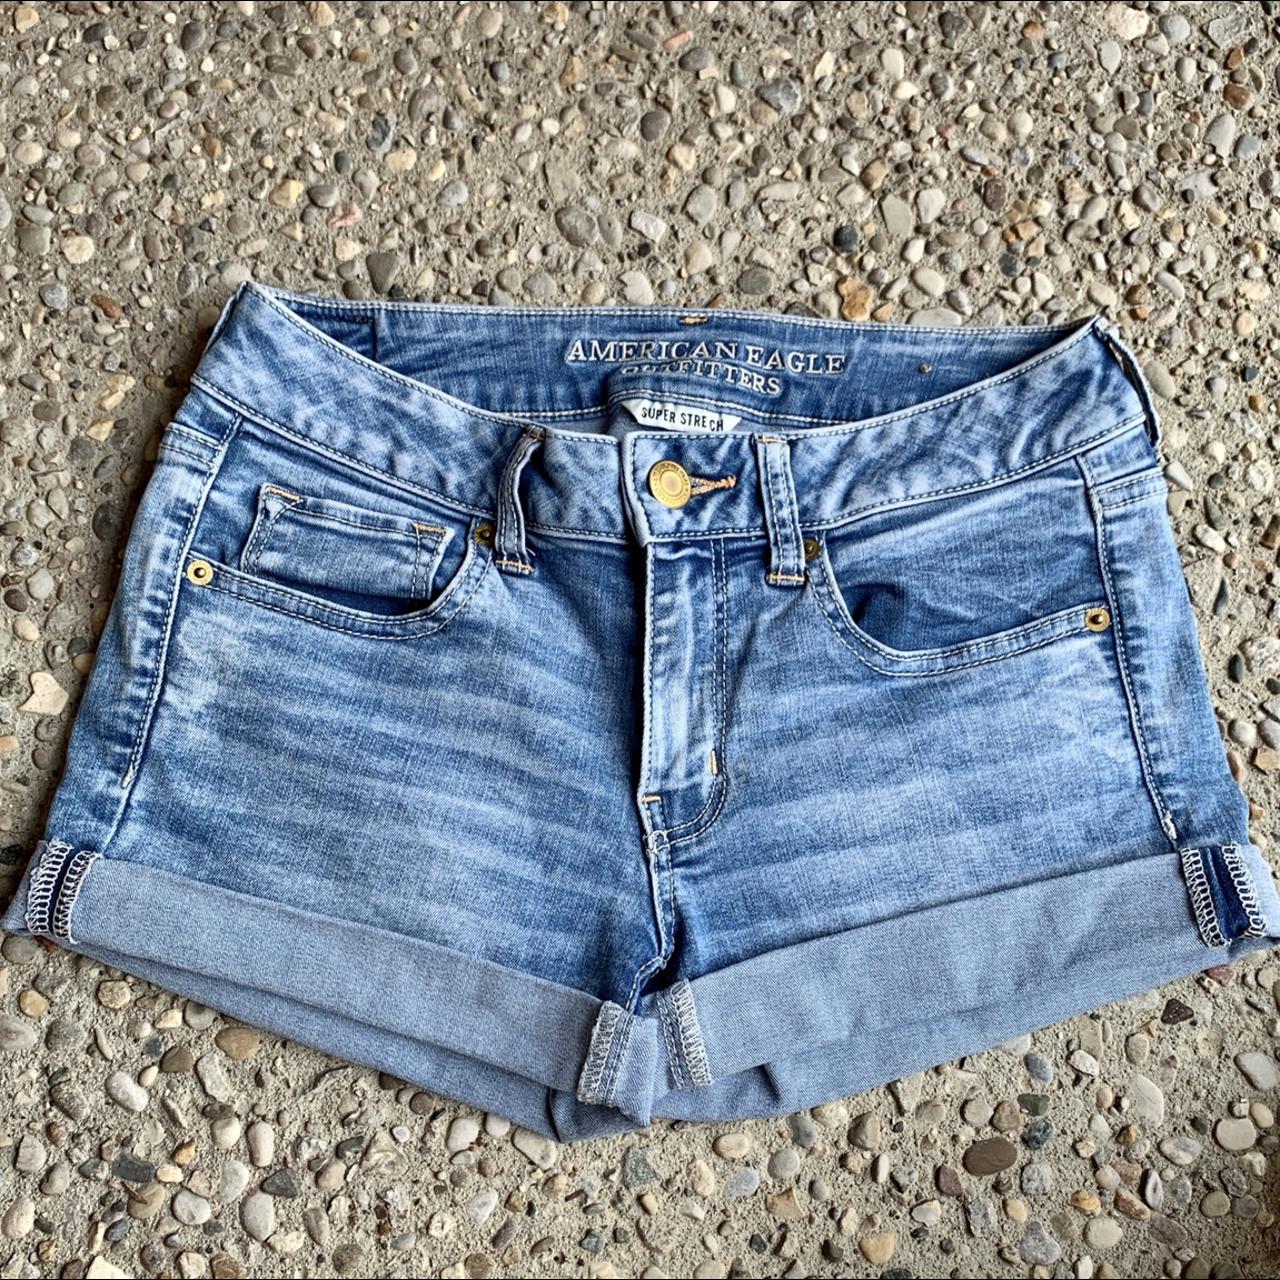 American Eagle Outfitters Women's Blue and Navy Shorts